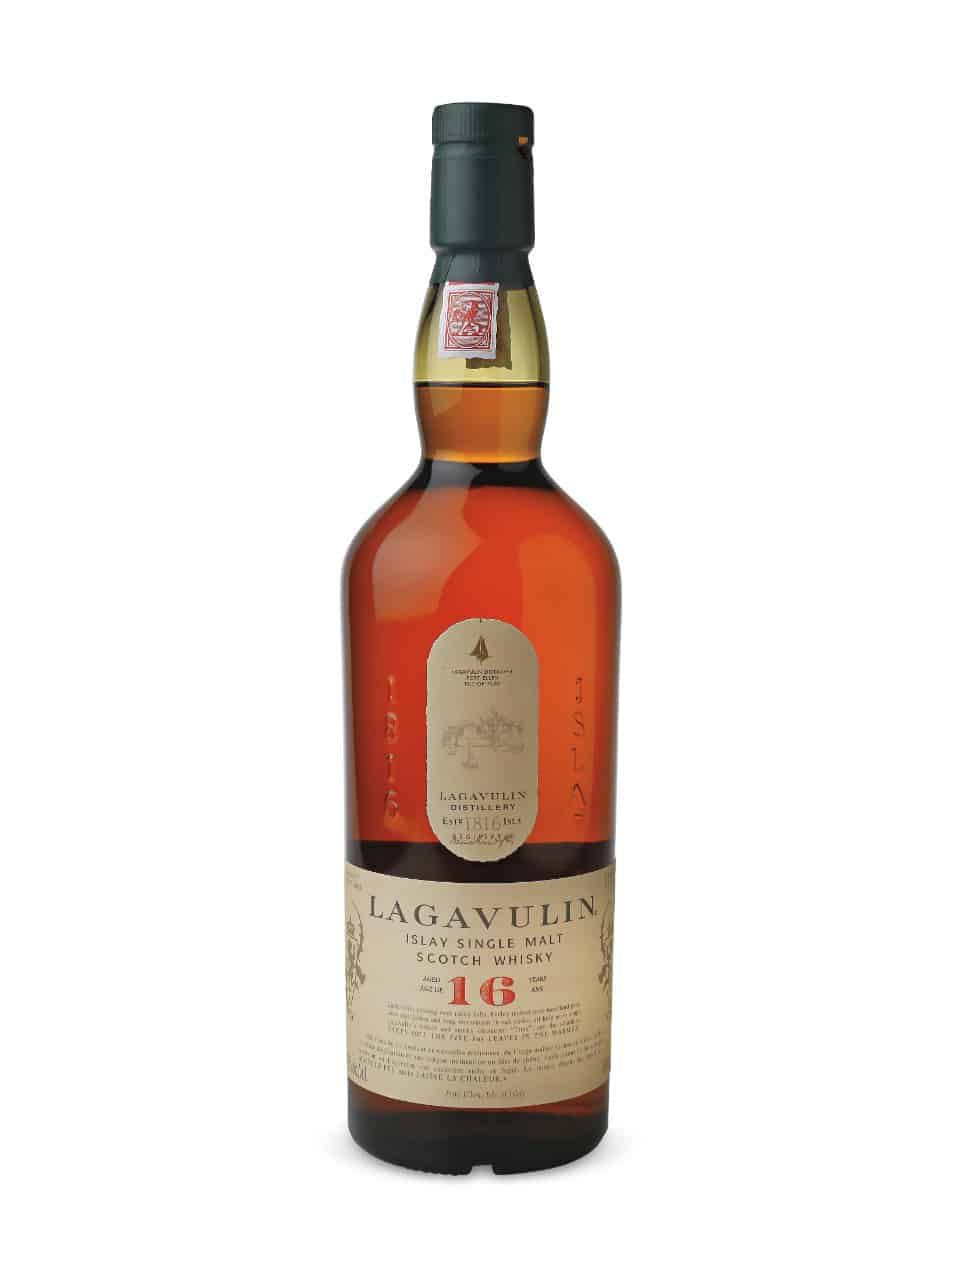 Best Scotch Whisky Lagavulin 16 Year Old